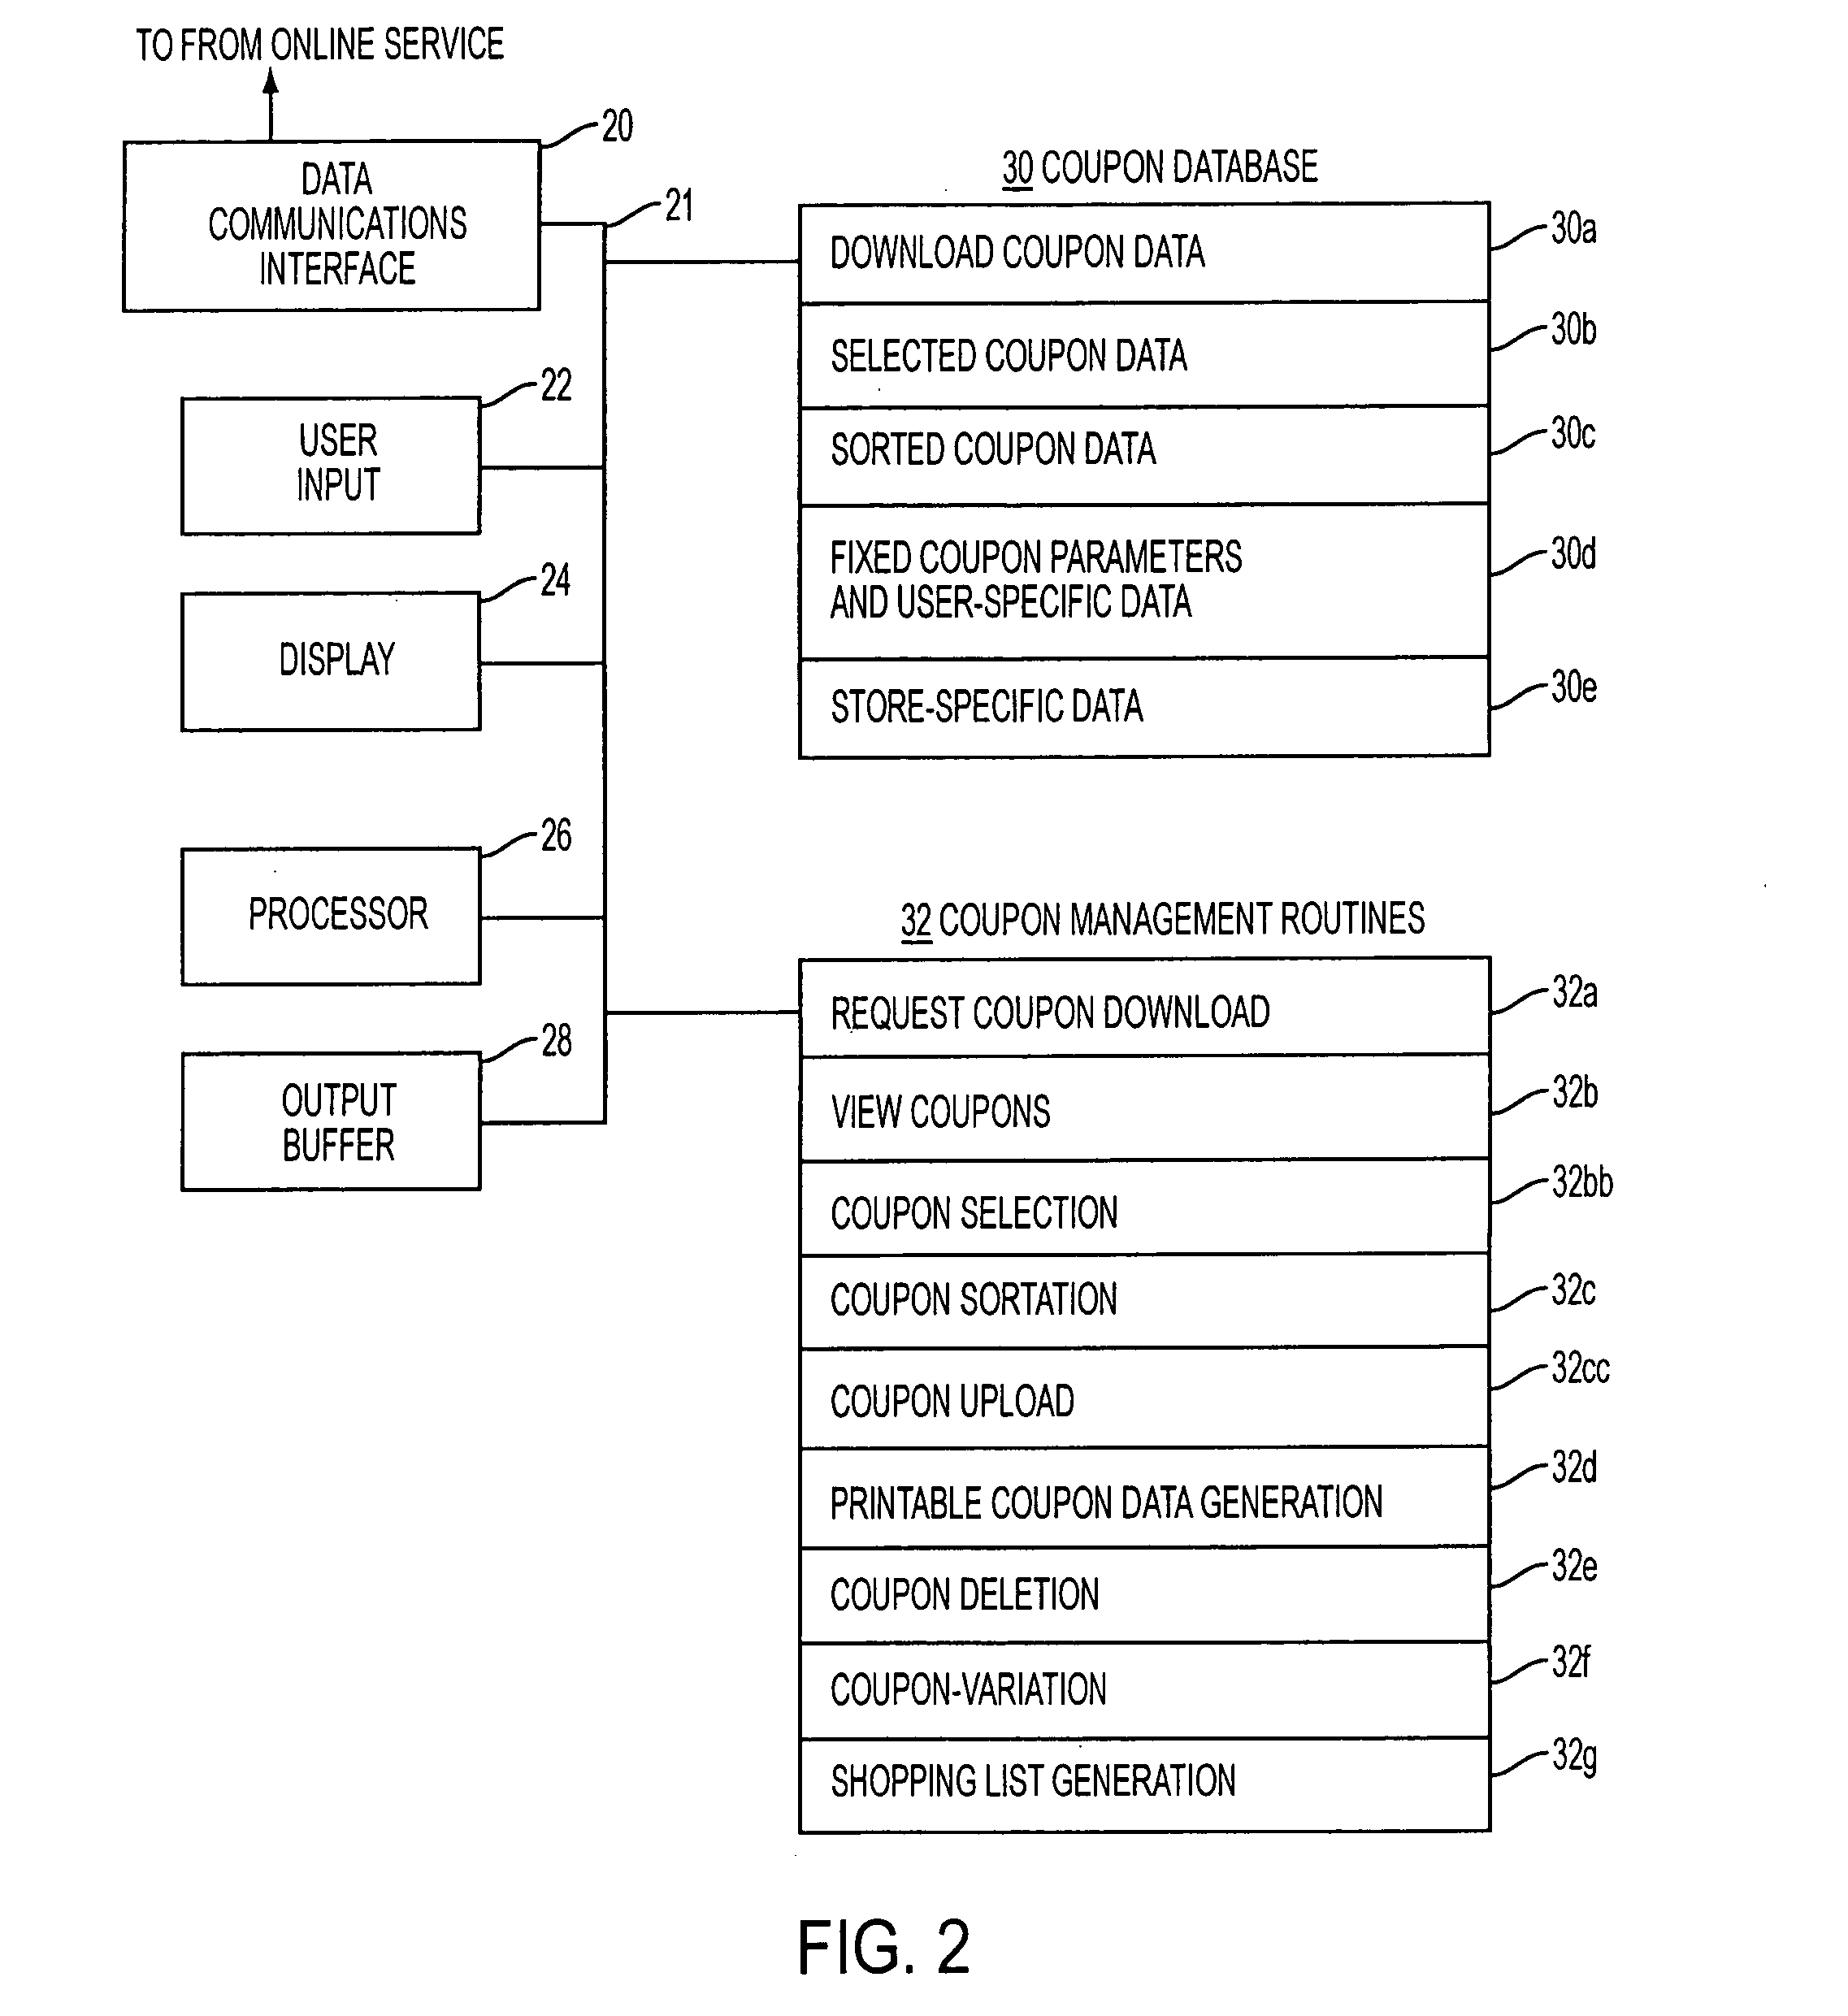 Method and system for electronic distribution of incentives having real-time consumer-based directions